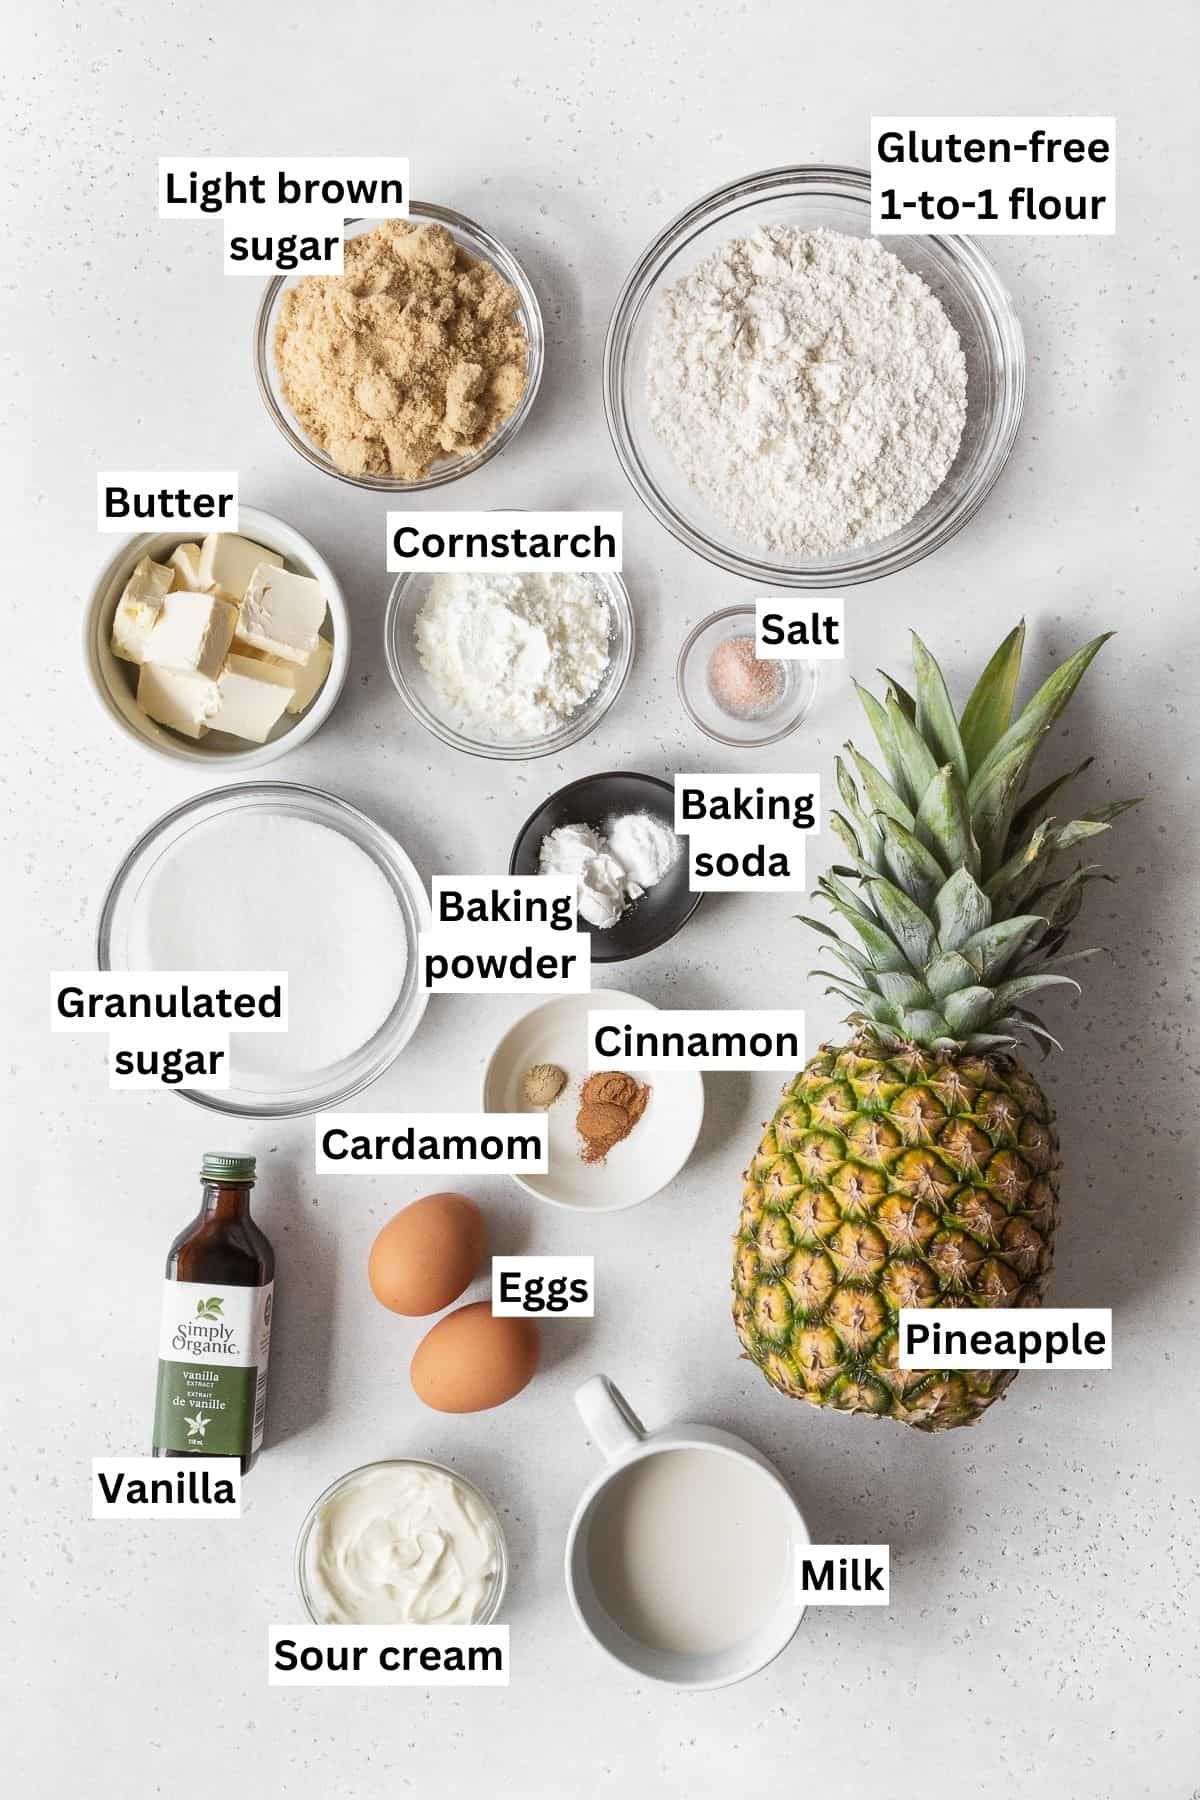 All of the ingredients for gluten-free upside down pineapple cake on the counter.